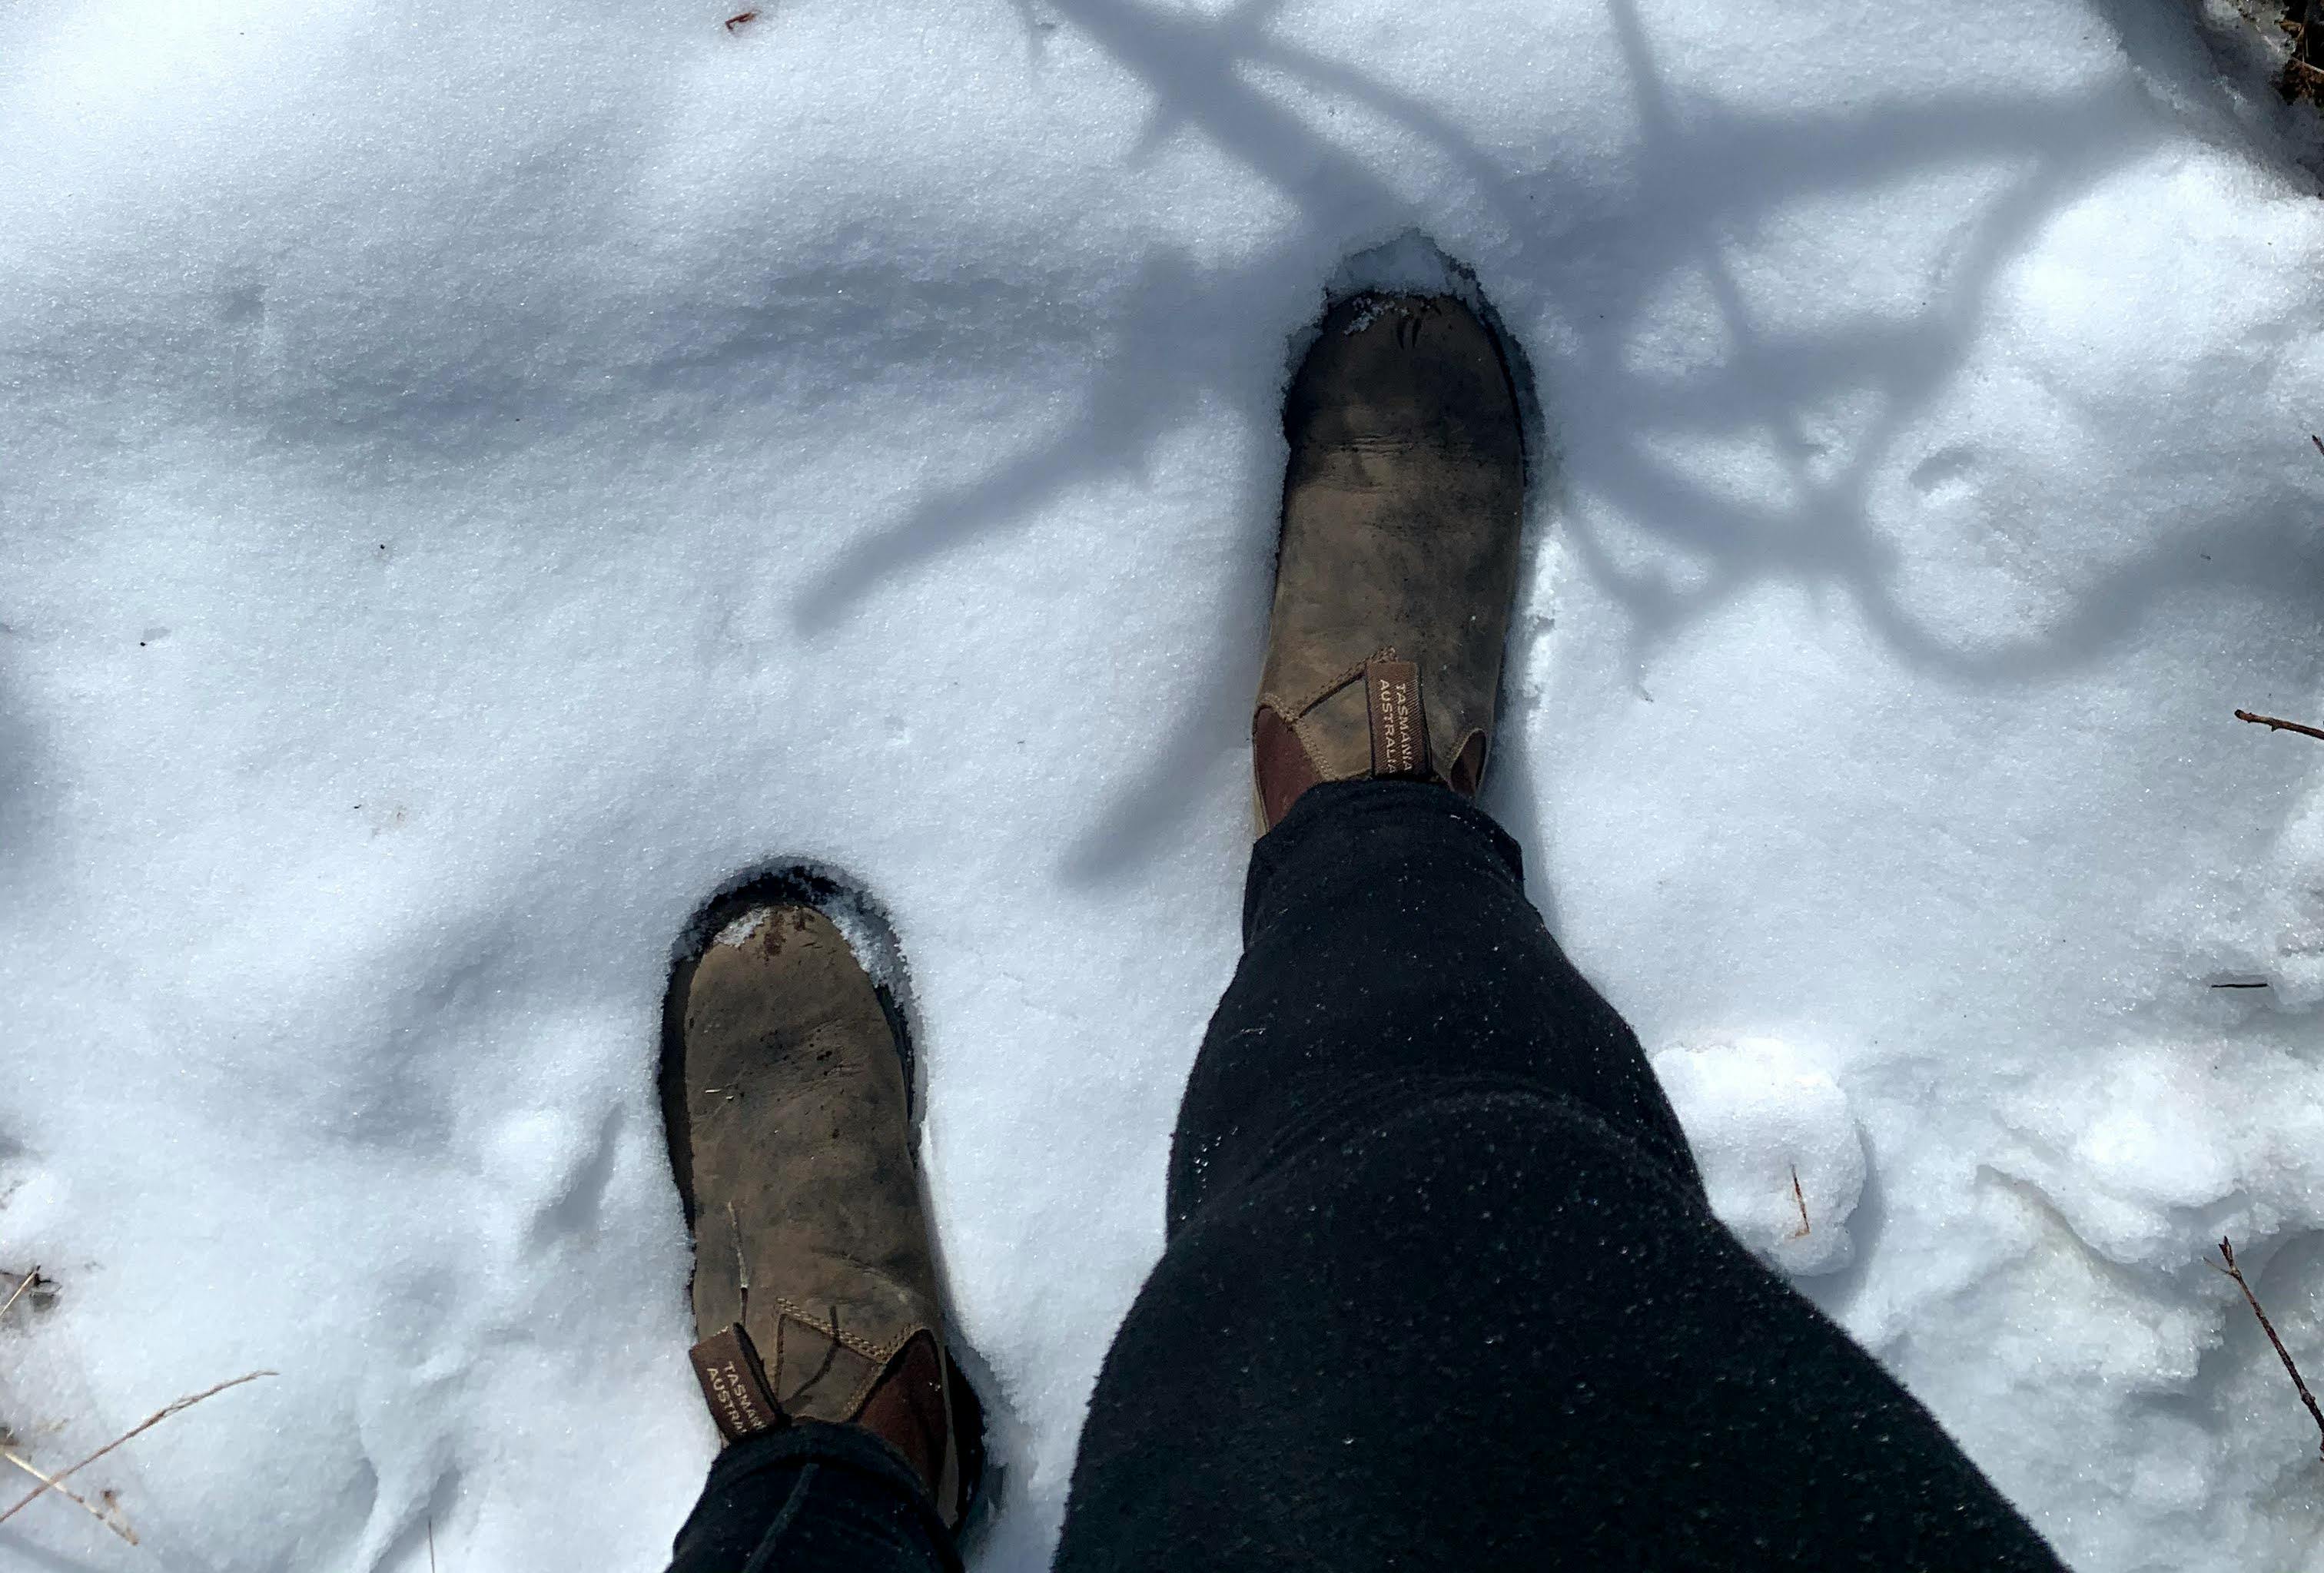 The author stands in her Blundstones in shallow snow.